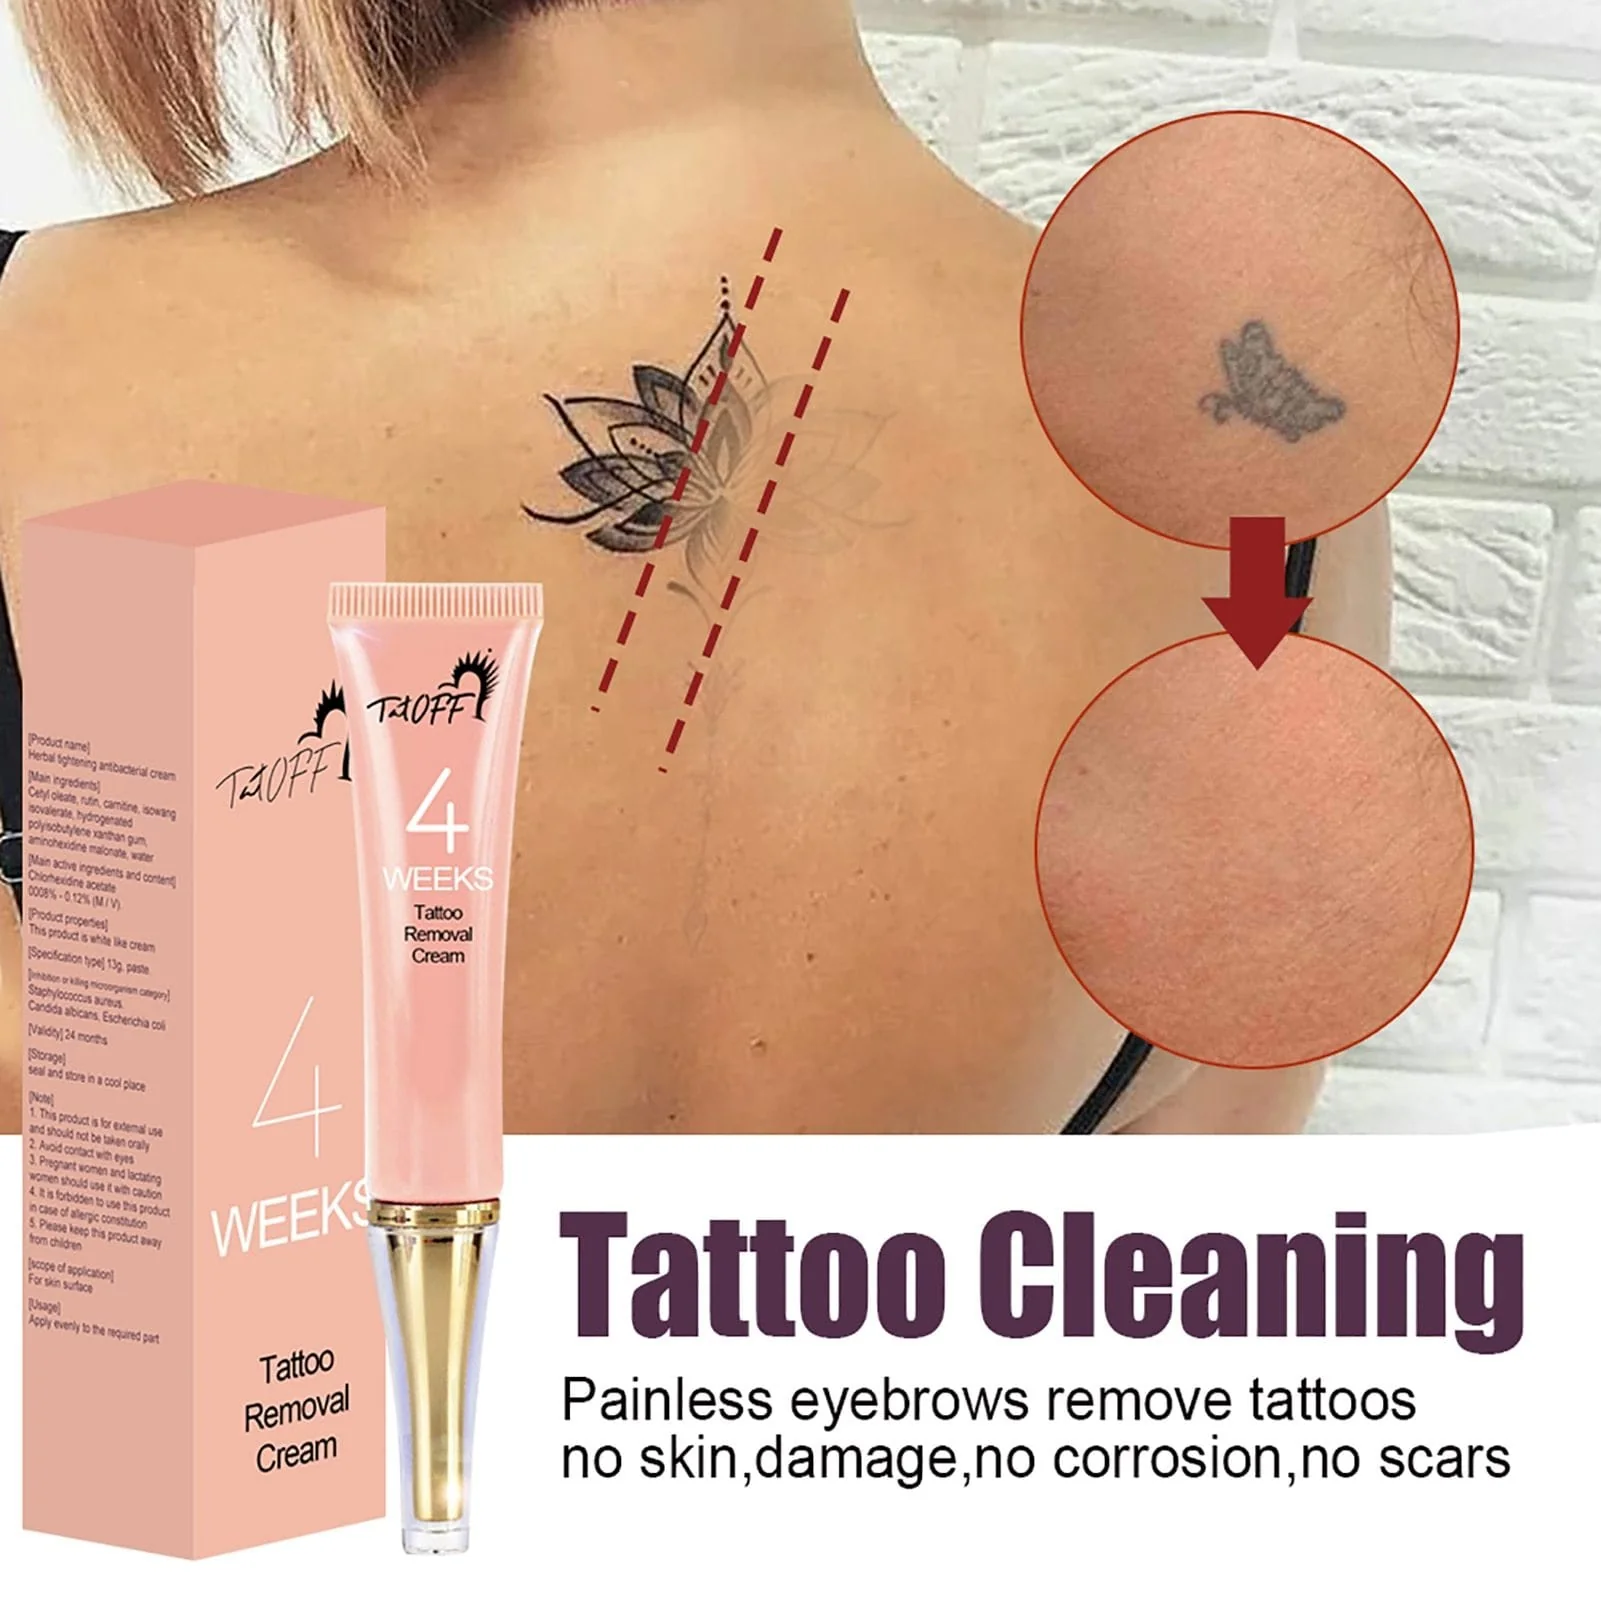 Tattoo Removal Cream, Skin Tattoos Cleansing Cream Eraser Safe Effective  Painless (2pcs) : Amazon.nl: Beauty